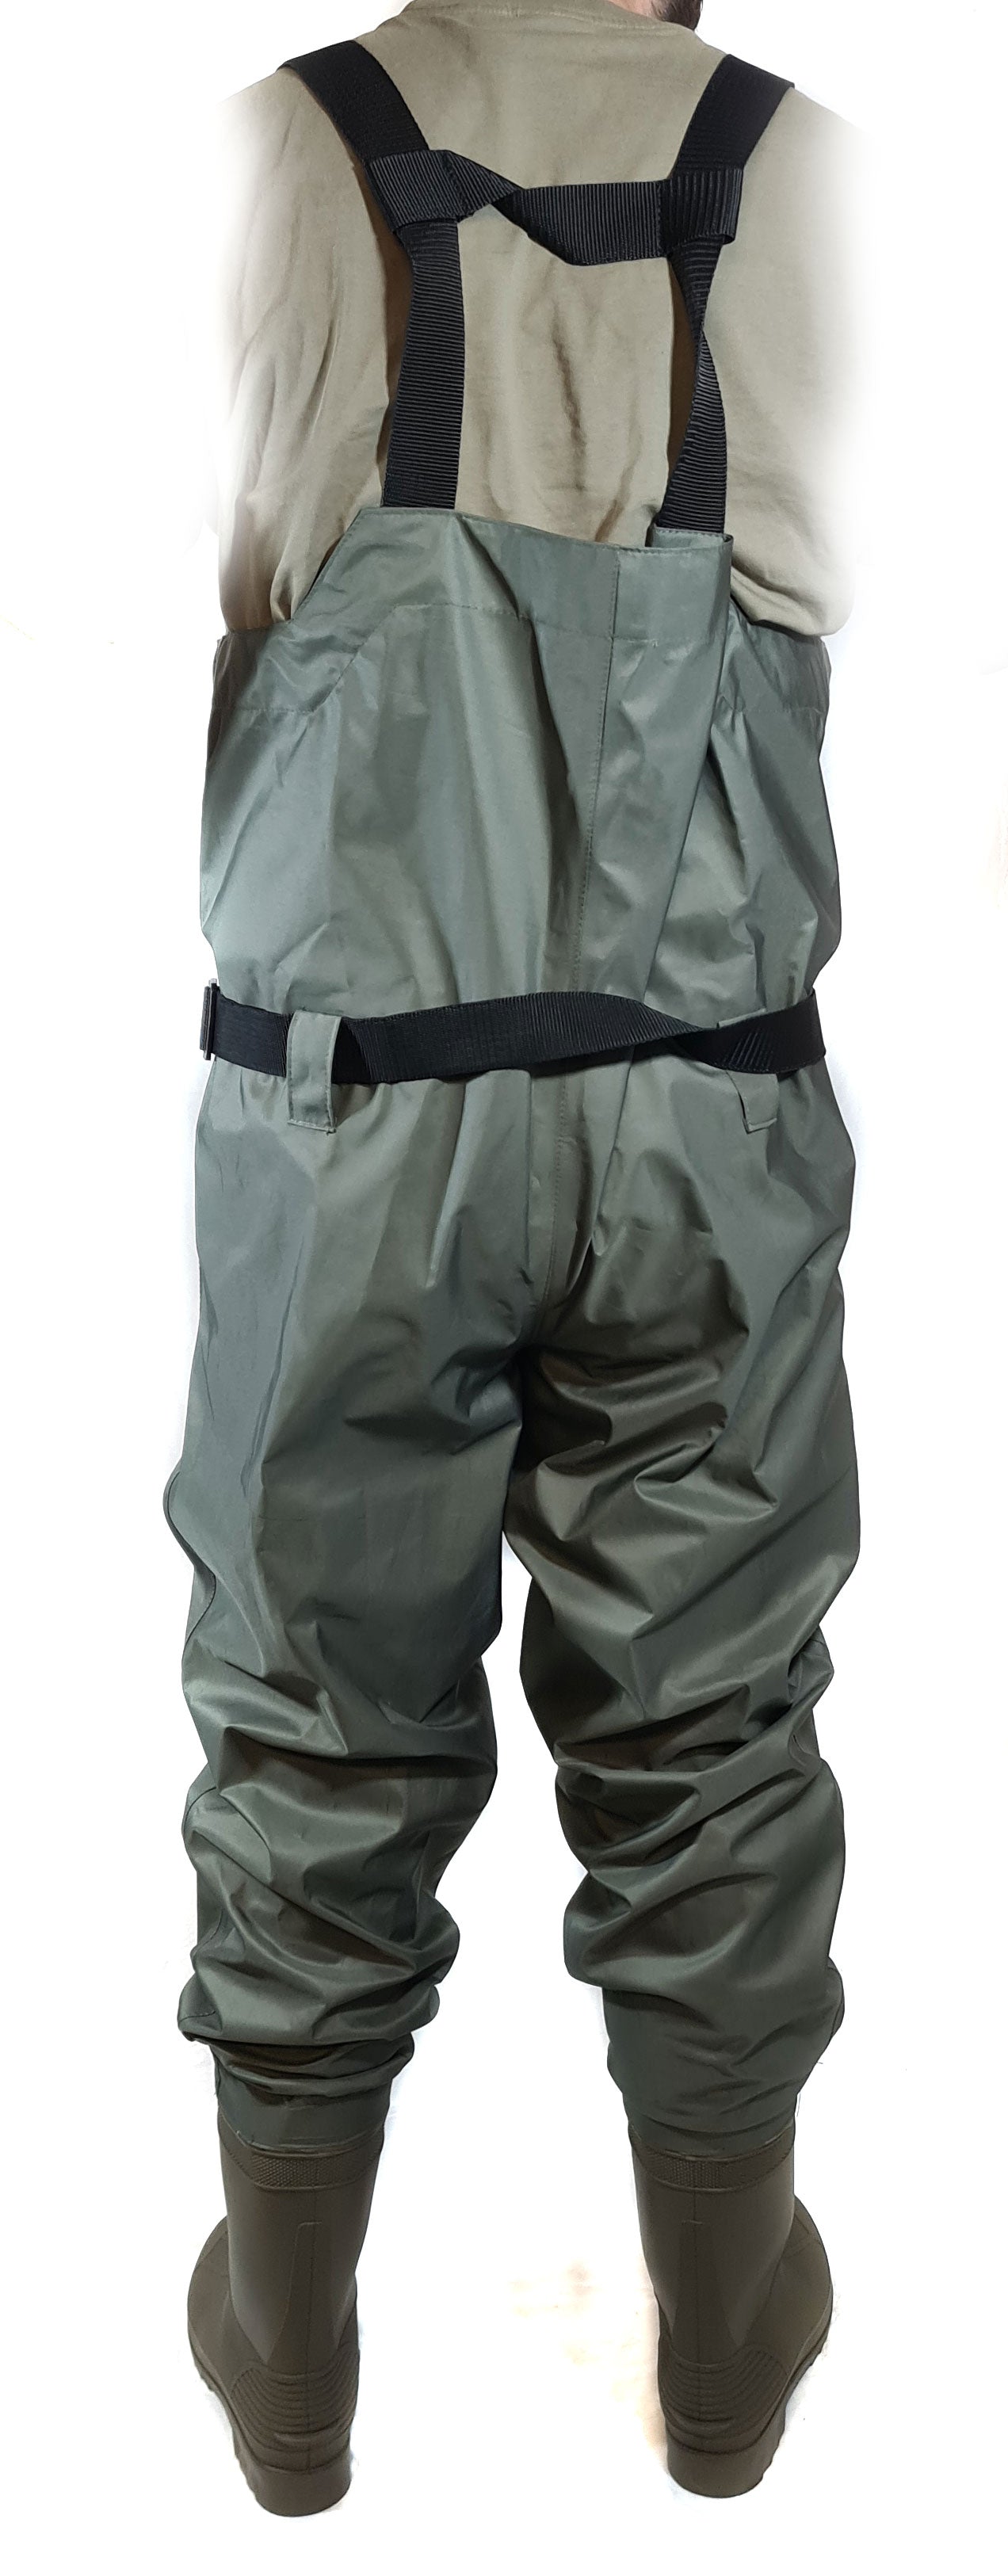 Bison Breathable Boot Foot Chest Waders - Free Studs & Delivery – Fishingmad